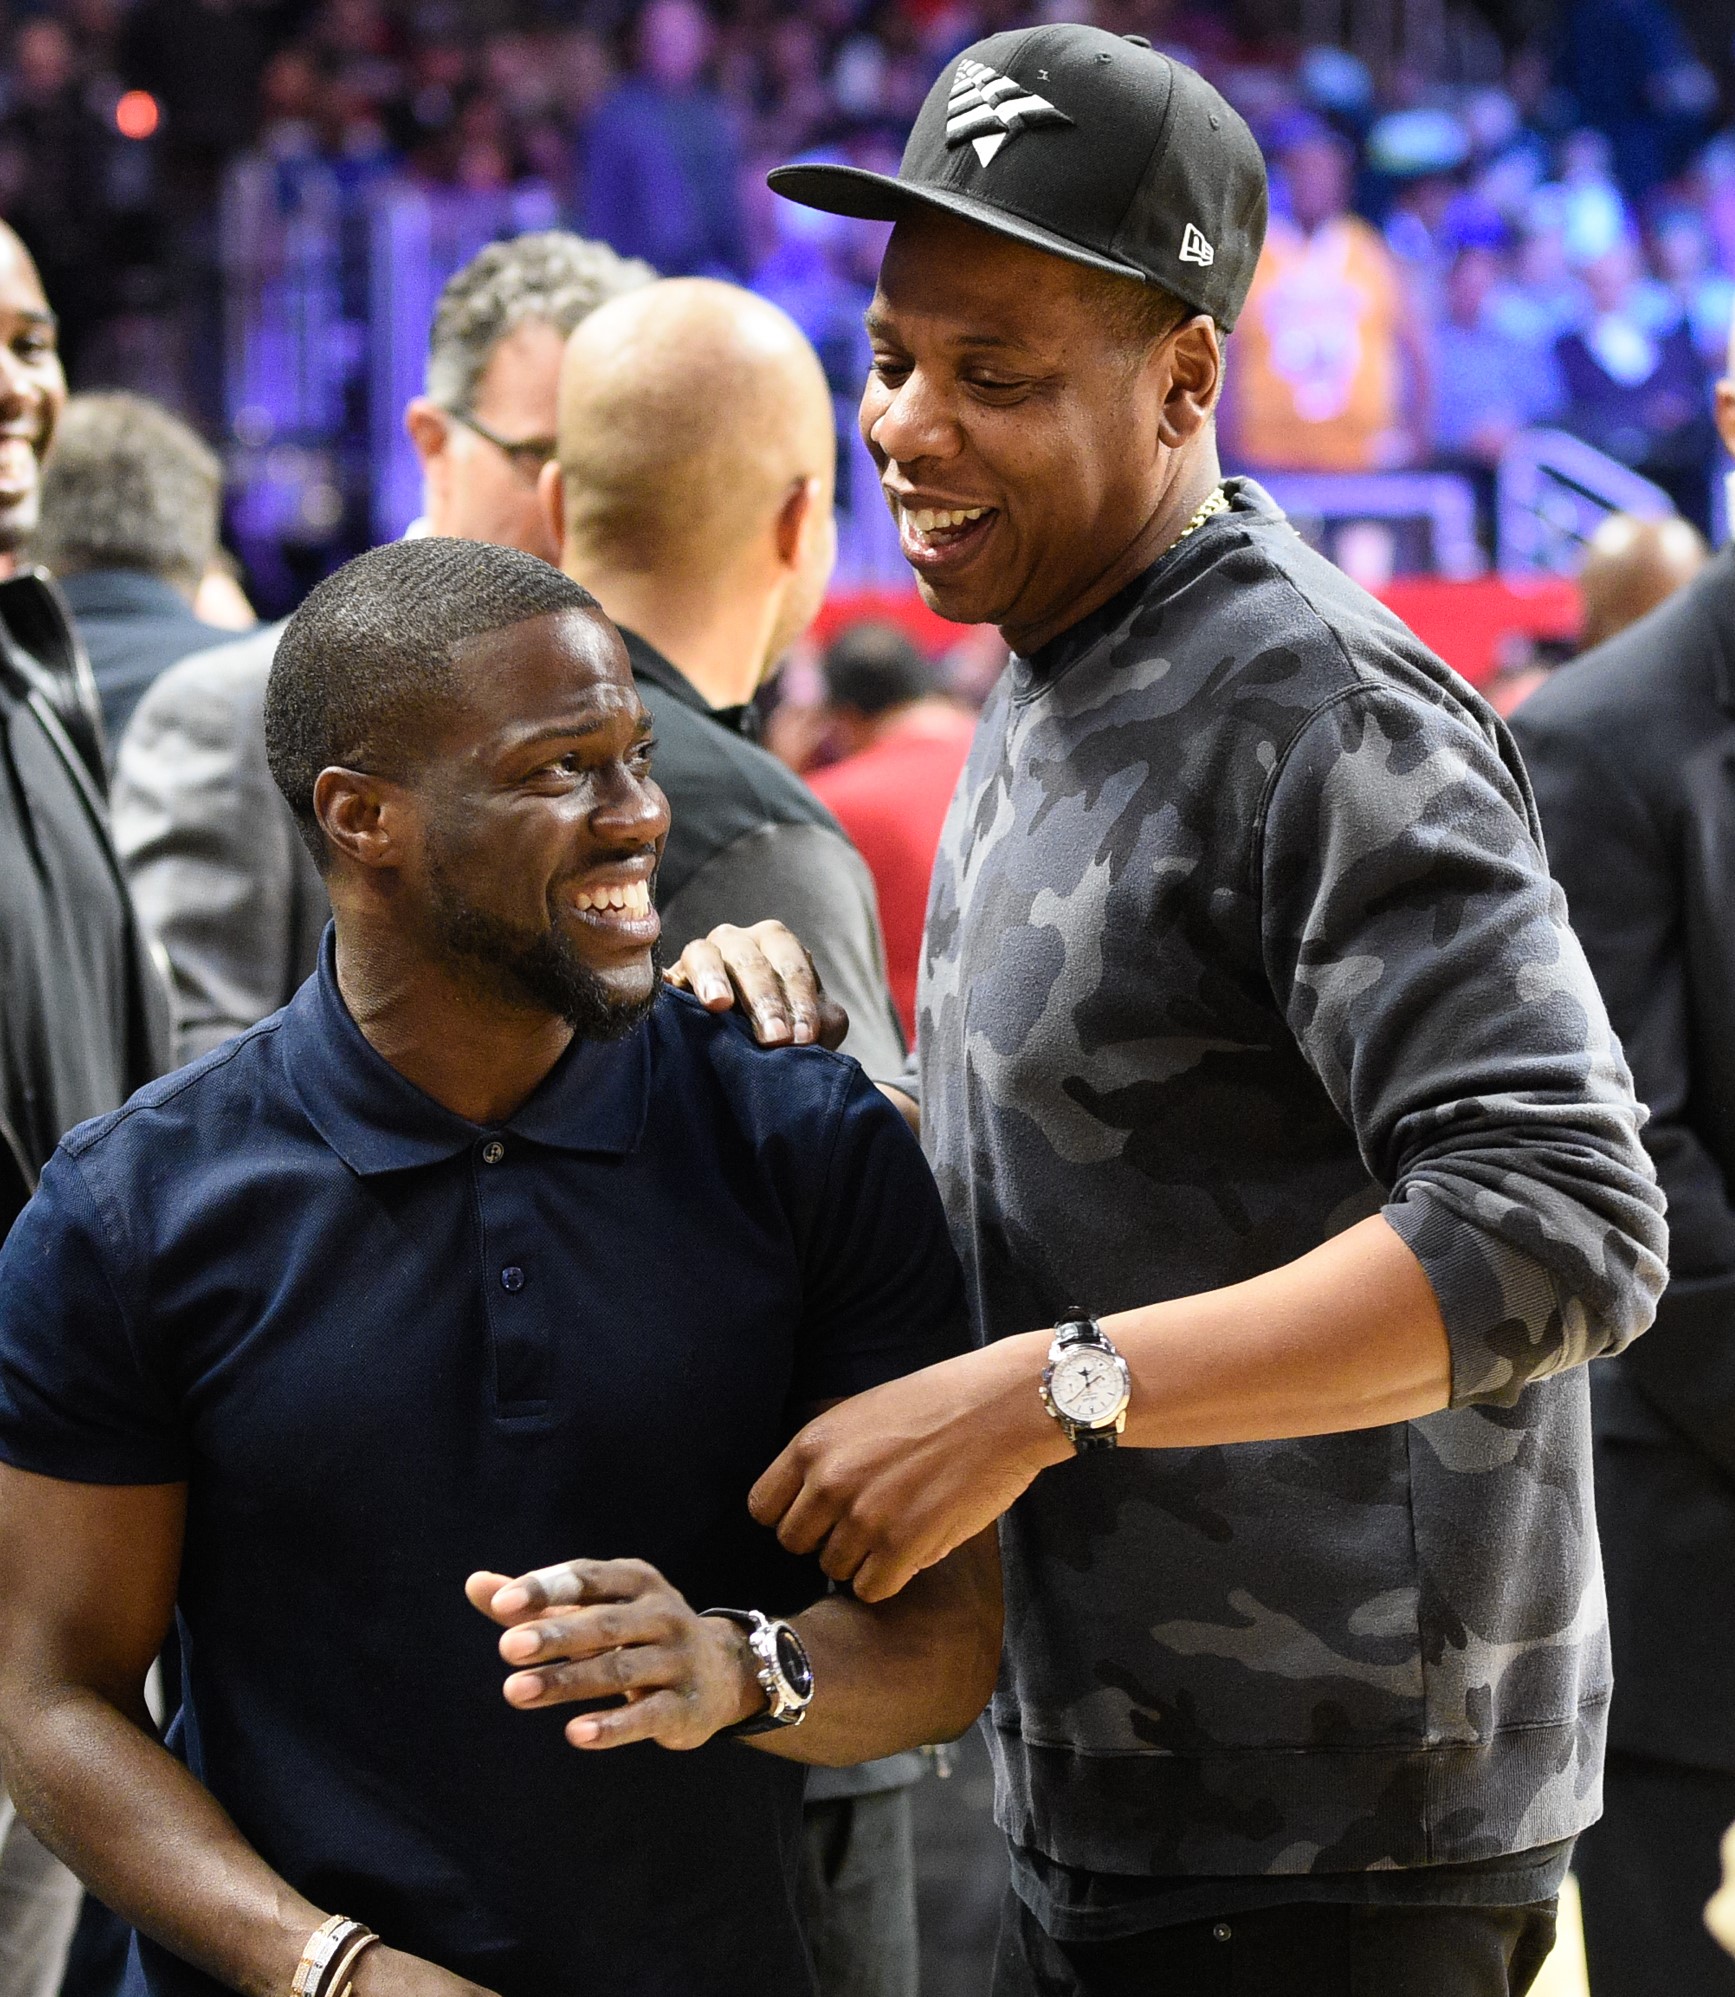 Jay-Z and Kevin Hart share a laugh at a basketball game between the Oklahoma City Thunder and the Los Angeles Clippers